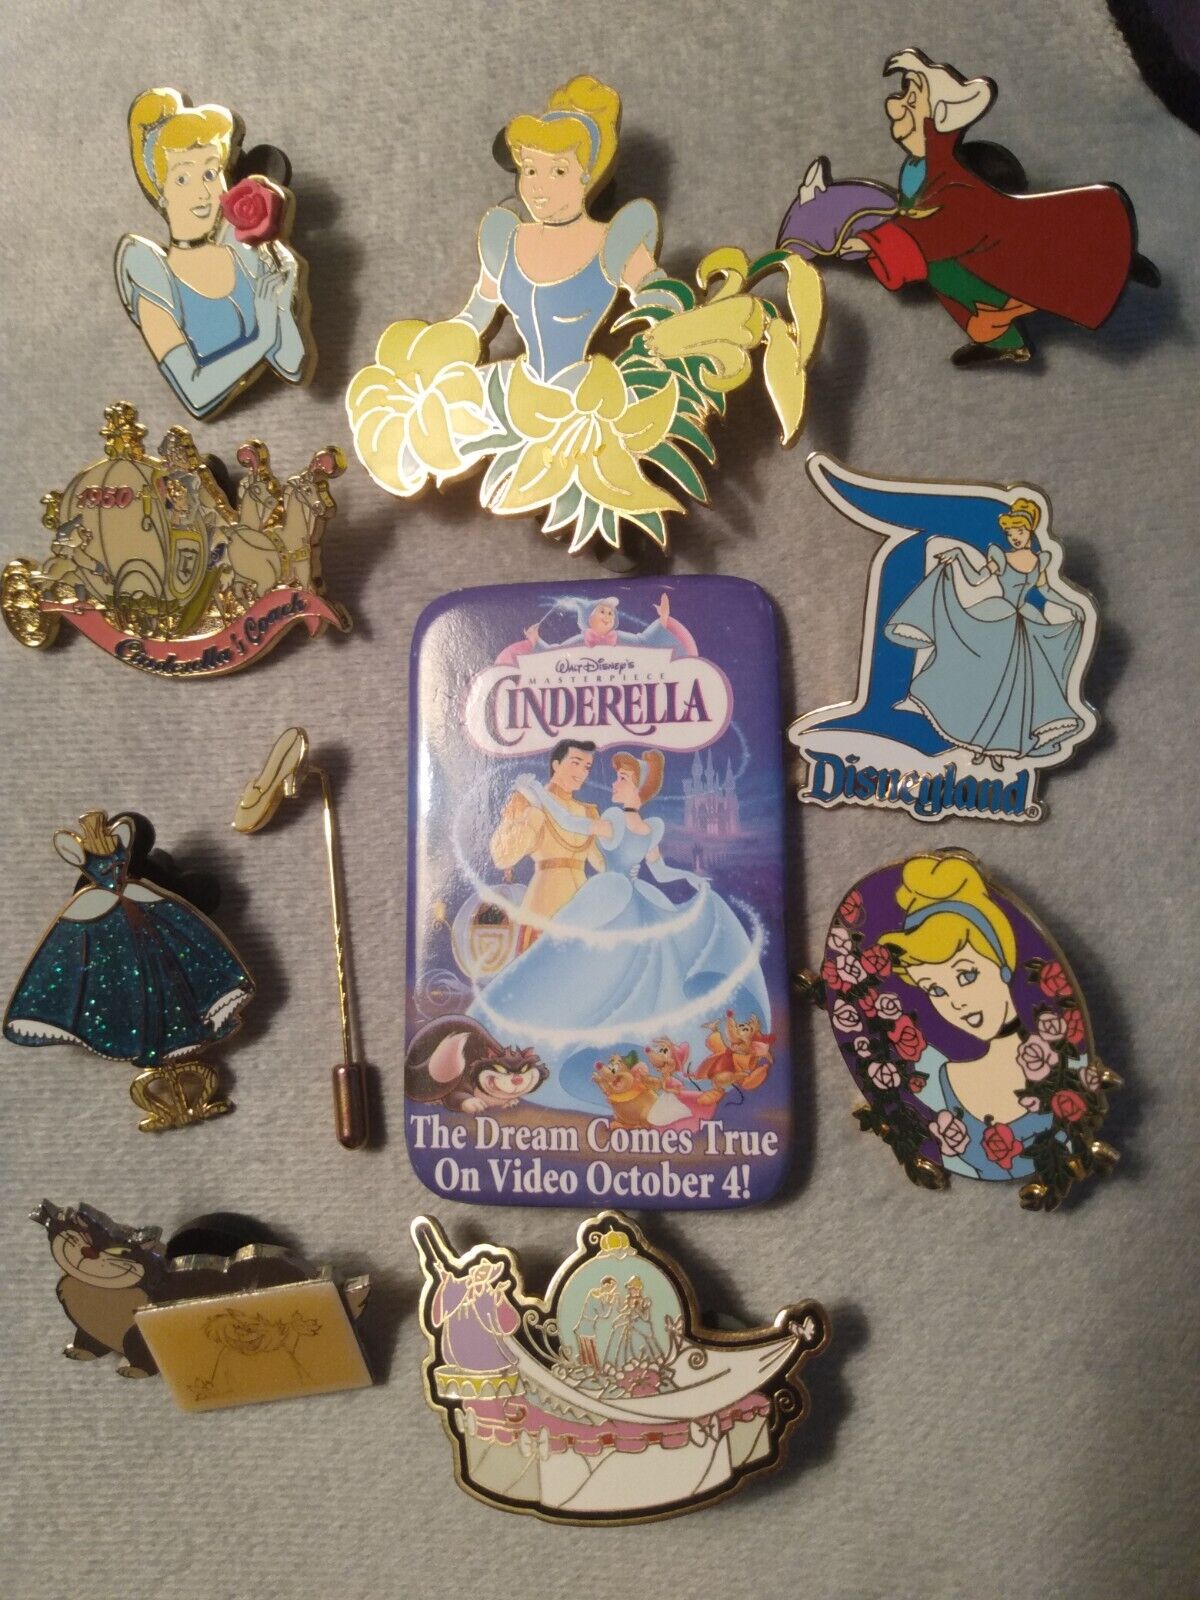 DISNEY CINDERELLA PINS**11 PIN COLLECTION**1 DISNEY AUCTION PIN PLUS 10 ASSORTED